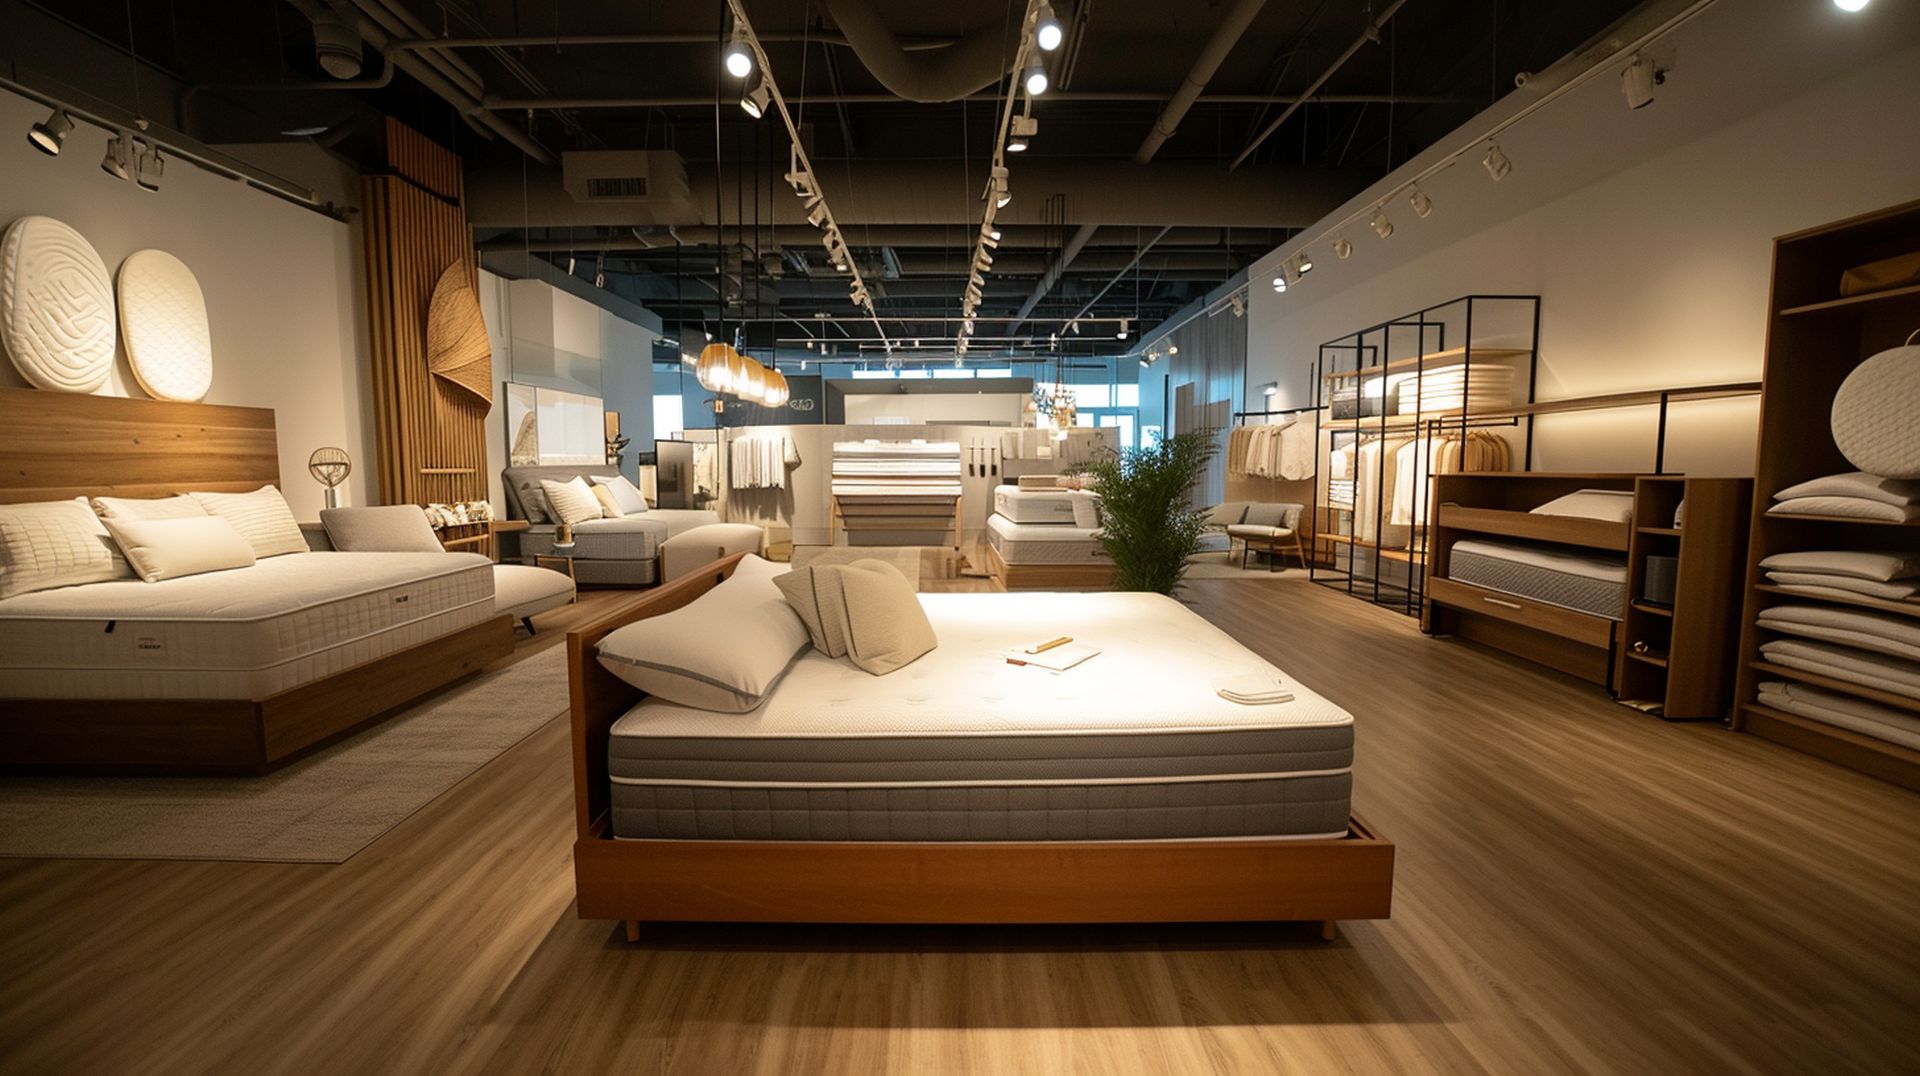 If you're looking for a new bed, mattress stores in North Hollywood offer the best customer and delivery service, financing, and warranties in California